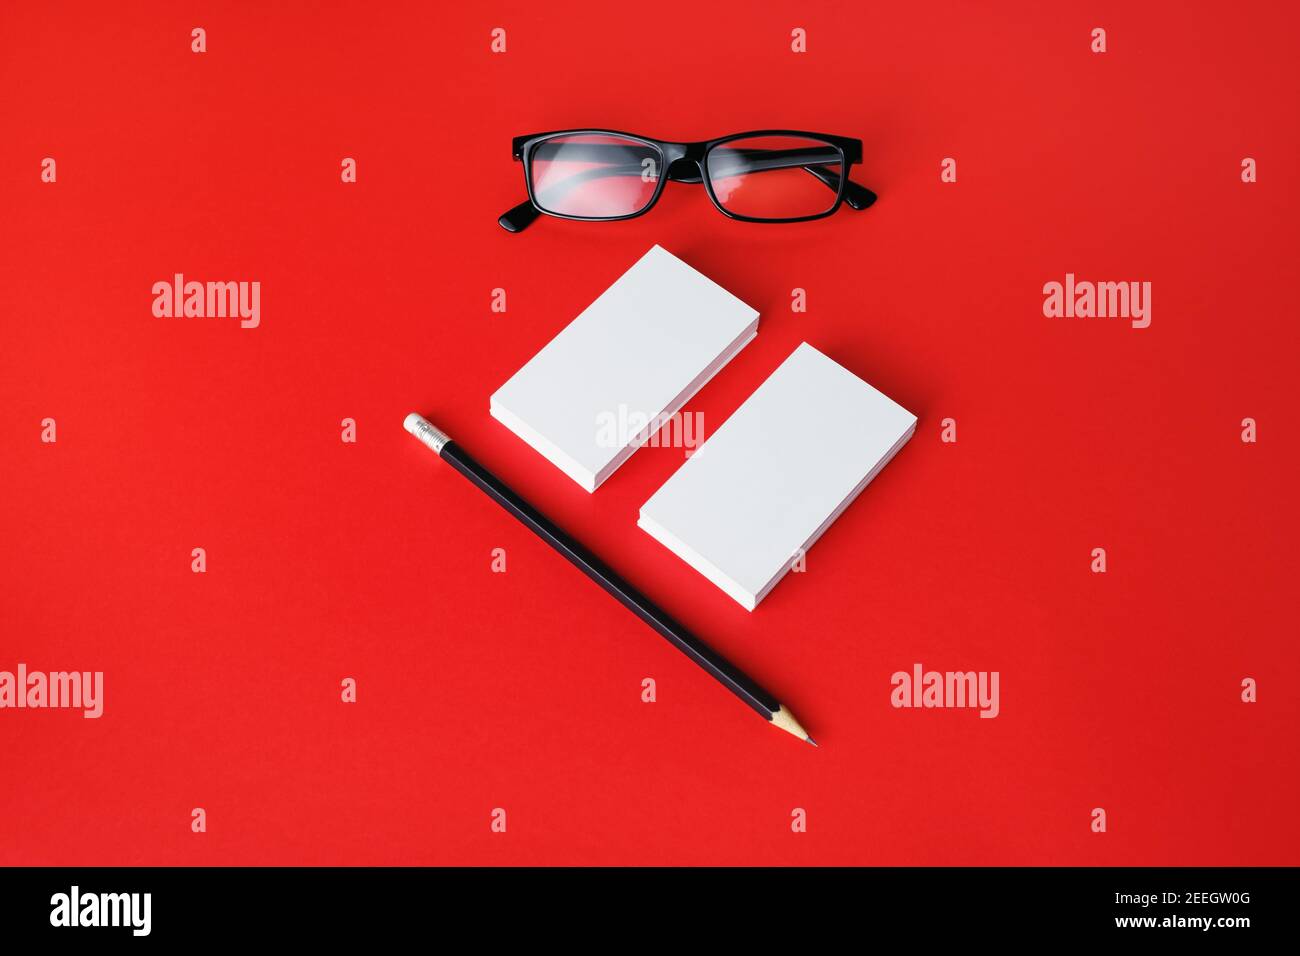 Blank business cards, pencil and glasses on red paper background. Branding mock up. Stock Photo